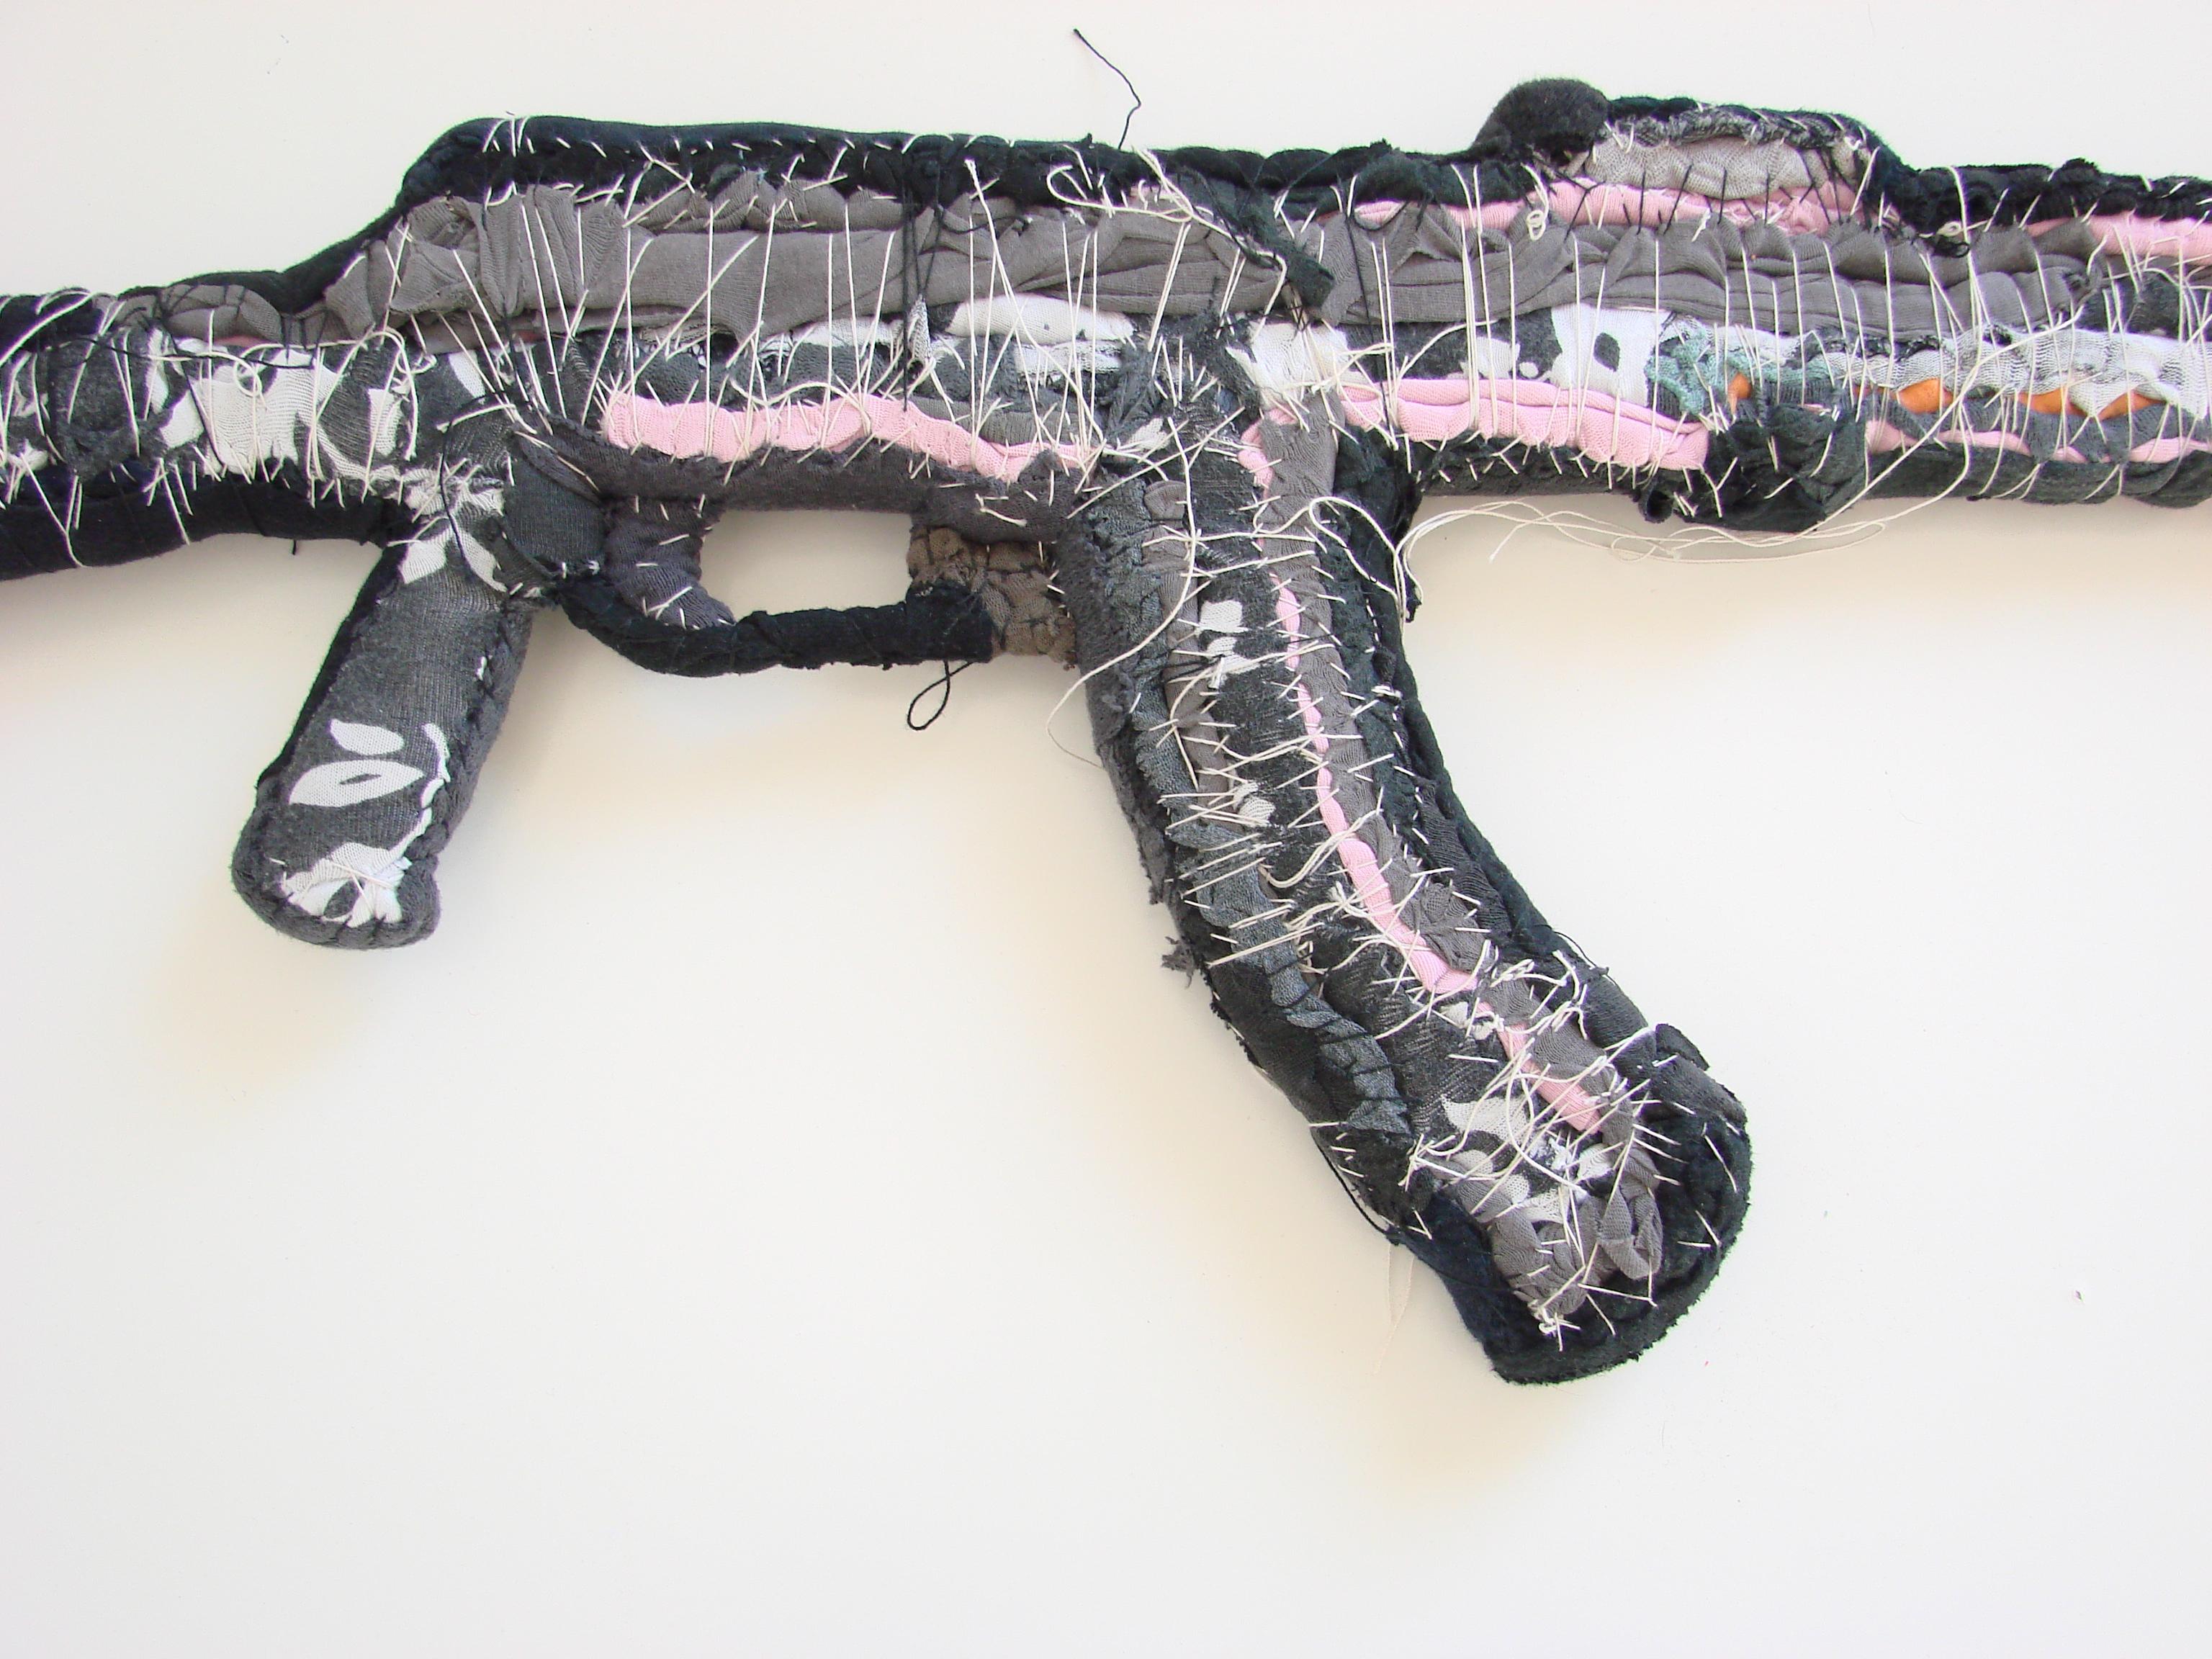 WATER RIFLE - Modern obiect sculpture made of steel and fabric - Sculpture by Sylwia Jakubowska-Szycik